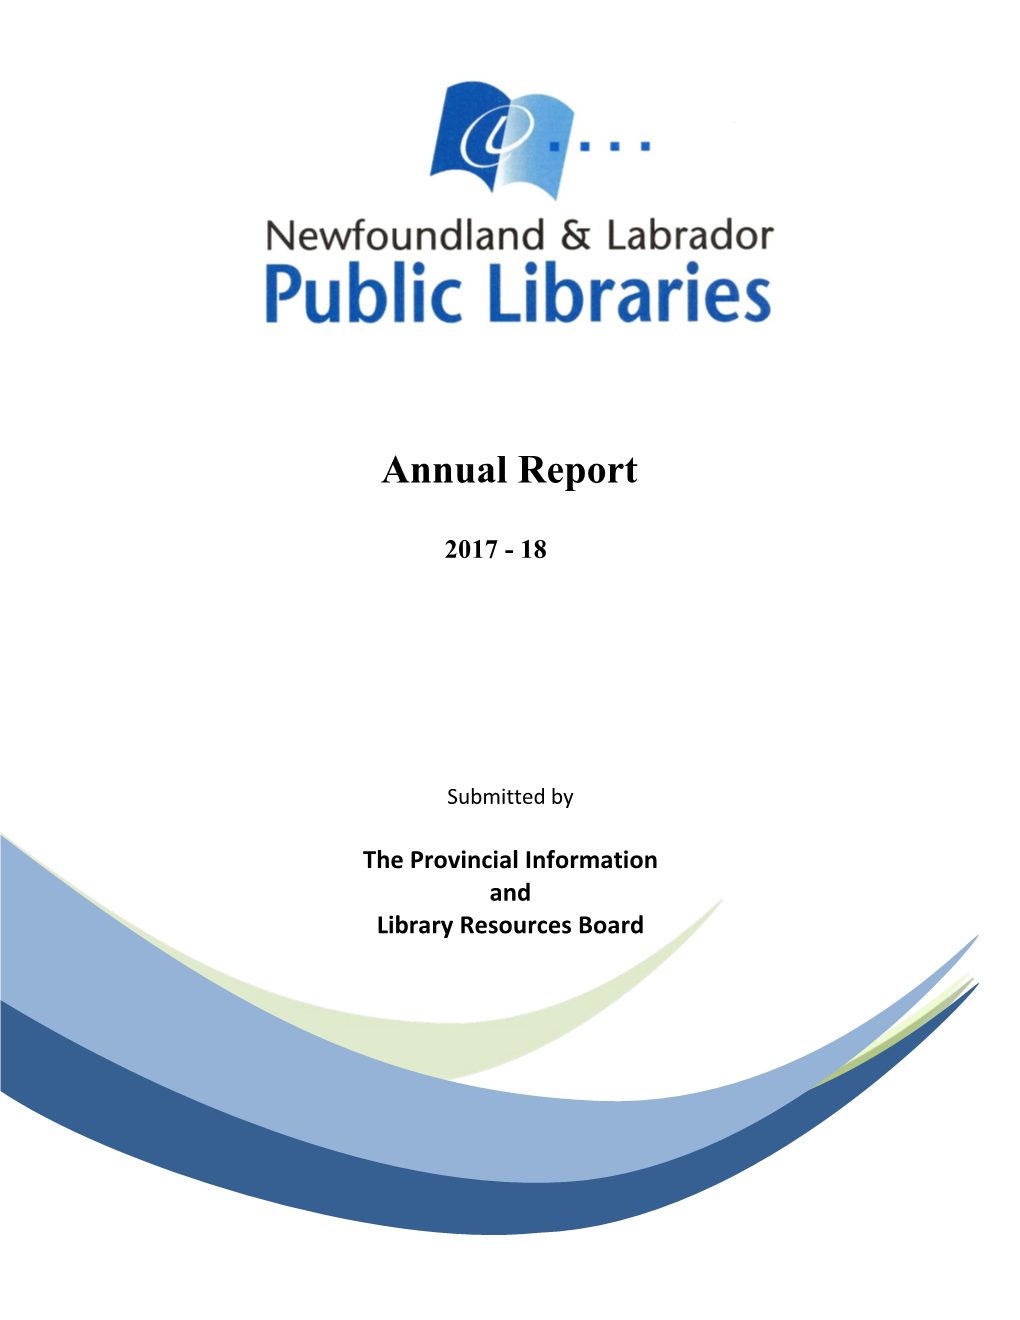 Provincial Information and Library Resources Board